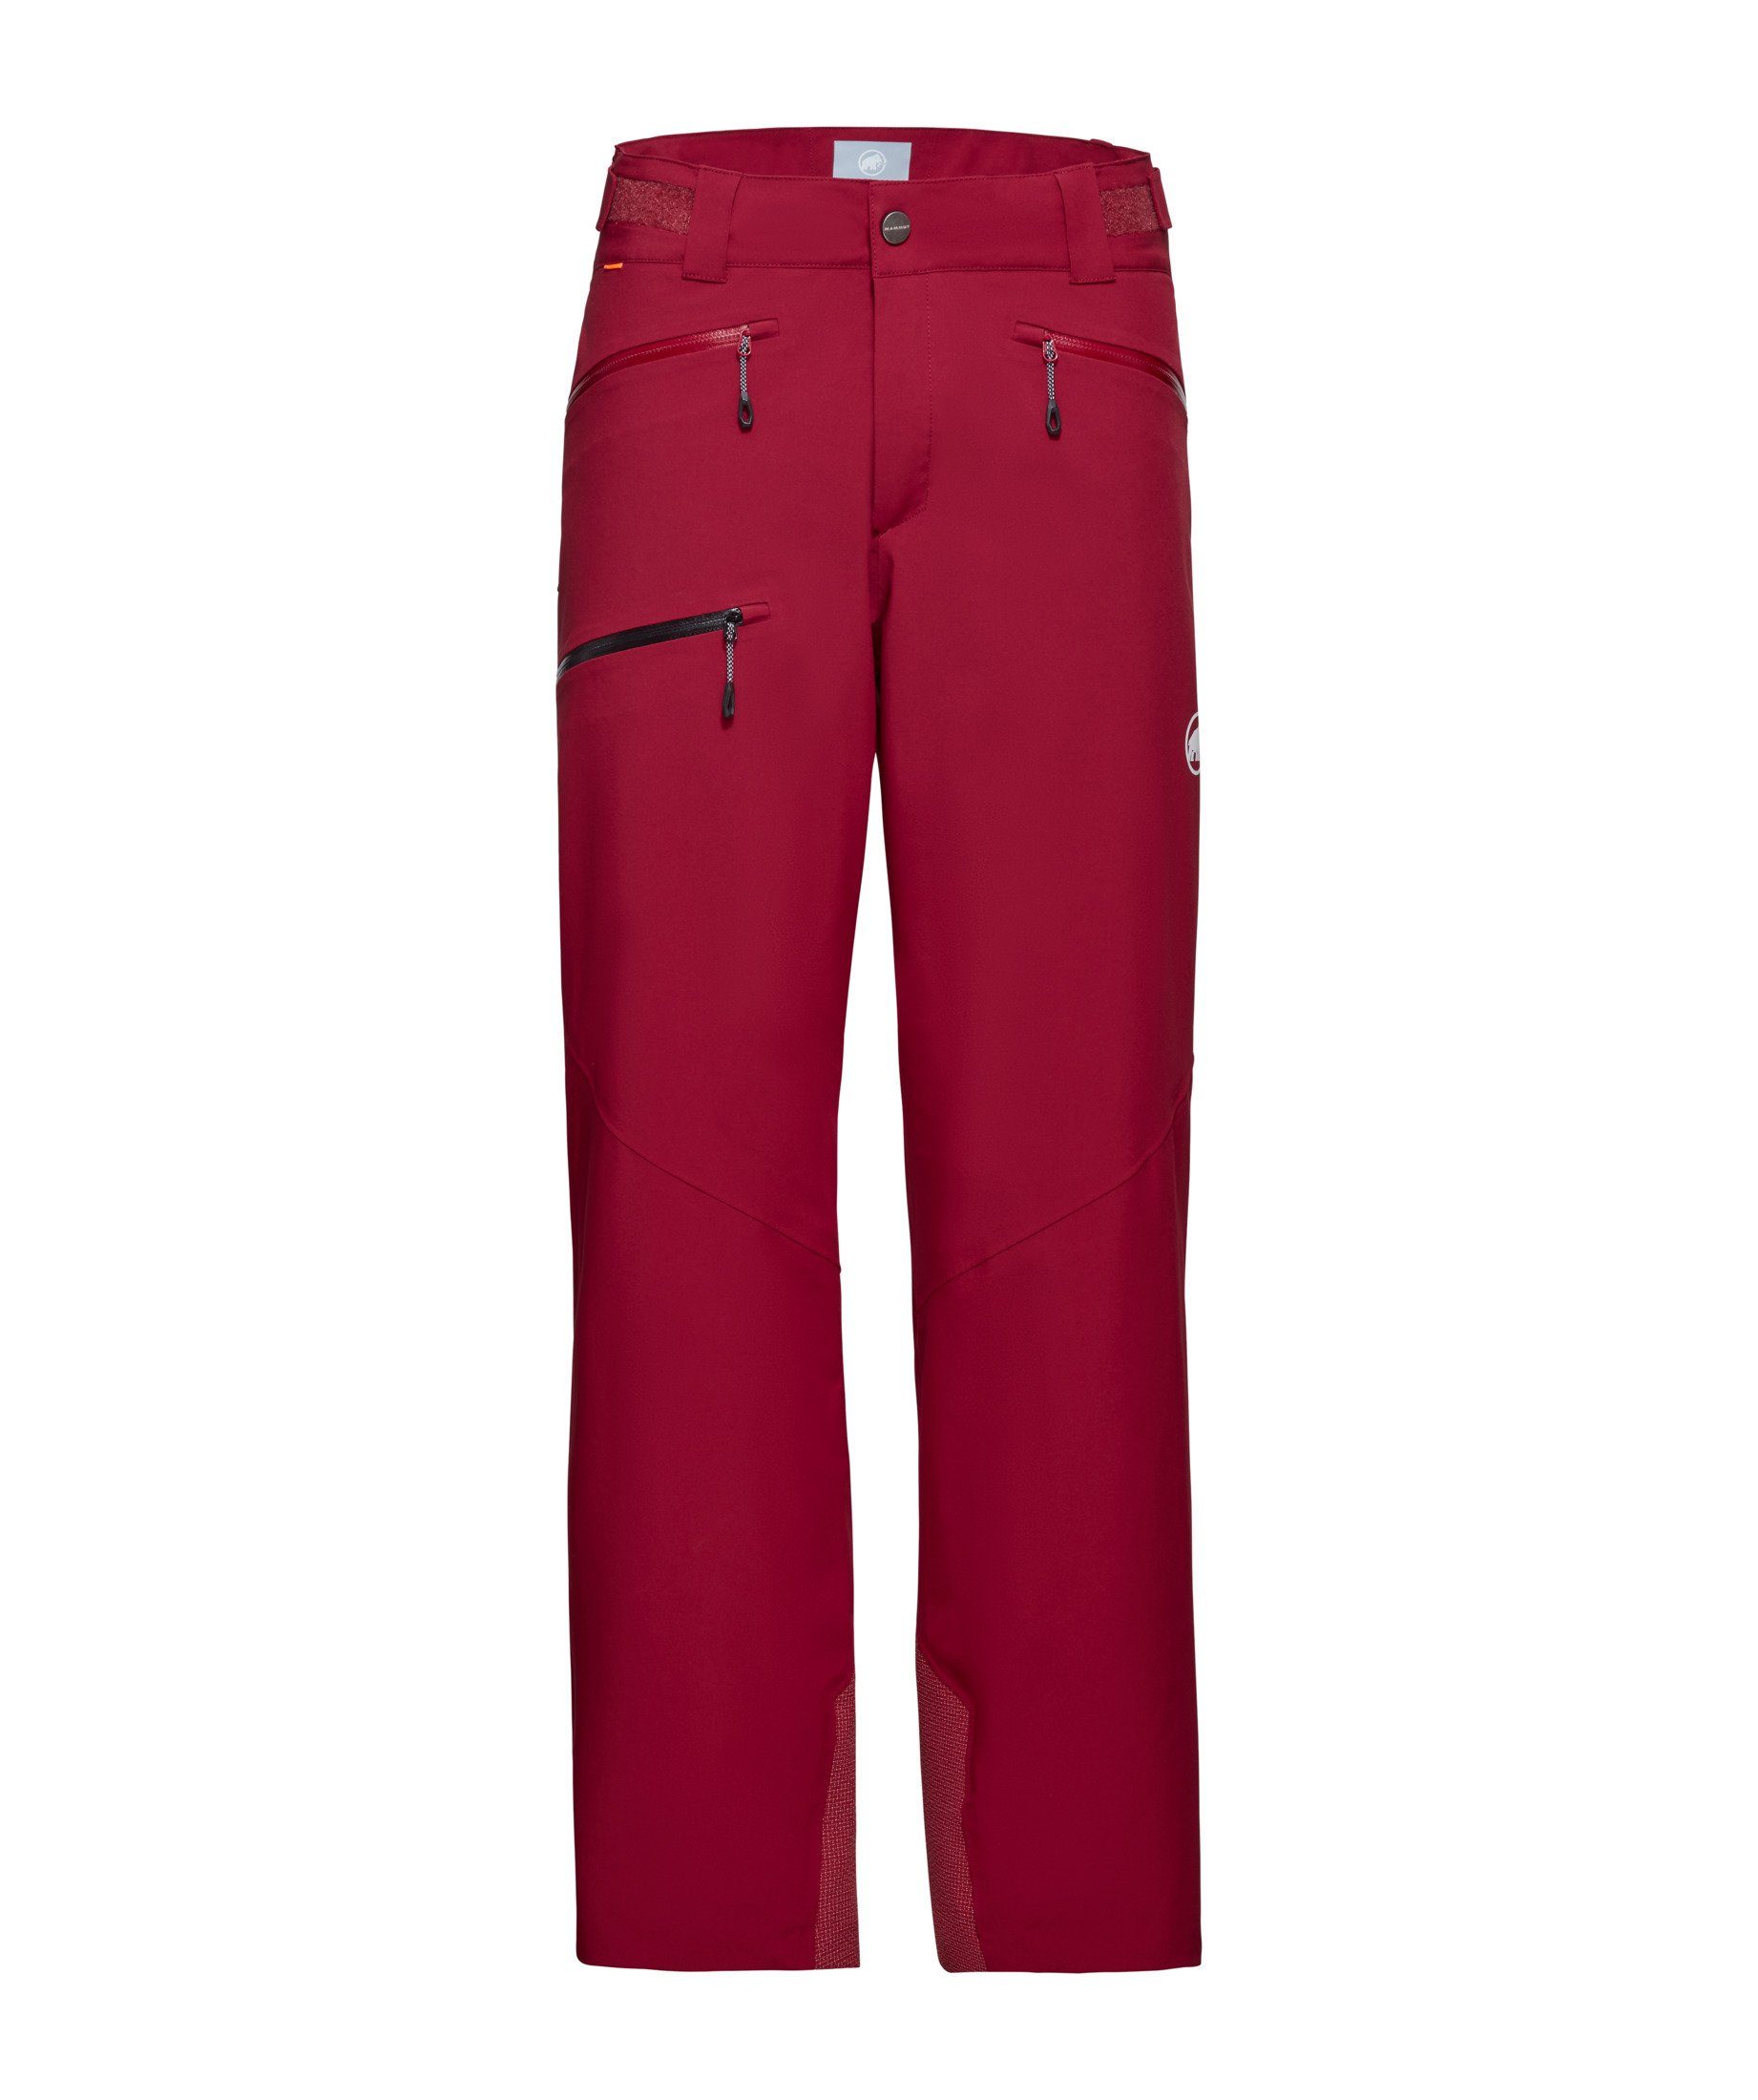 Mammut Skihose Stoney HS Thermo Pants Men blood red